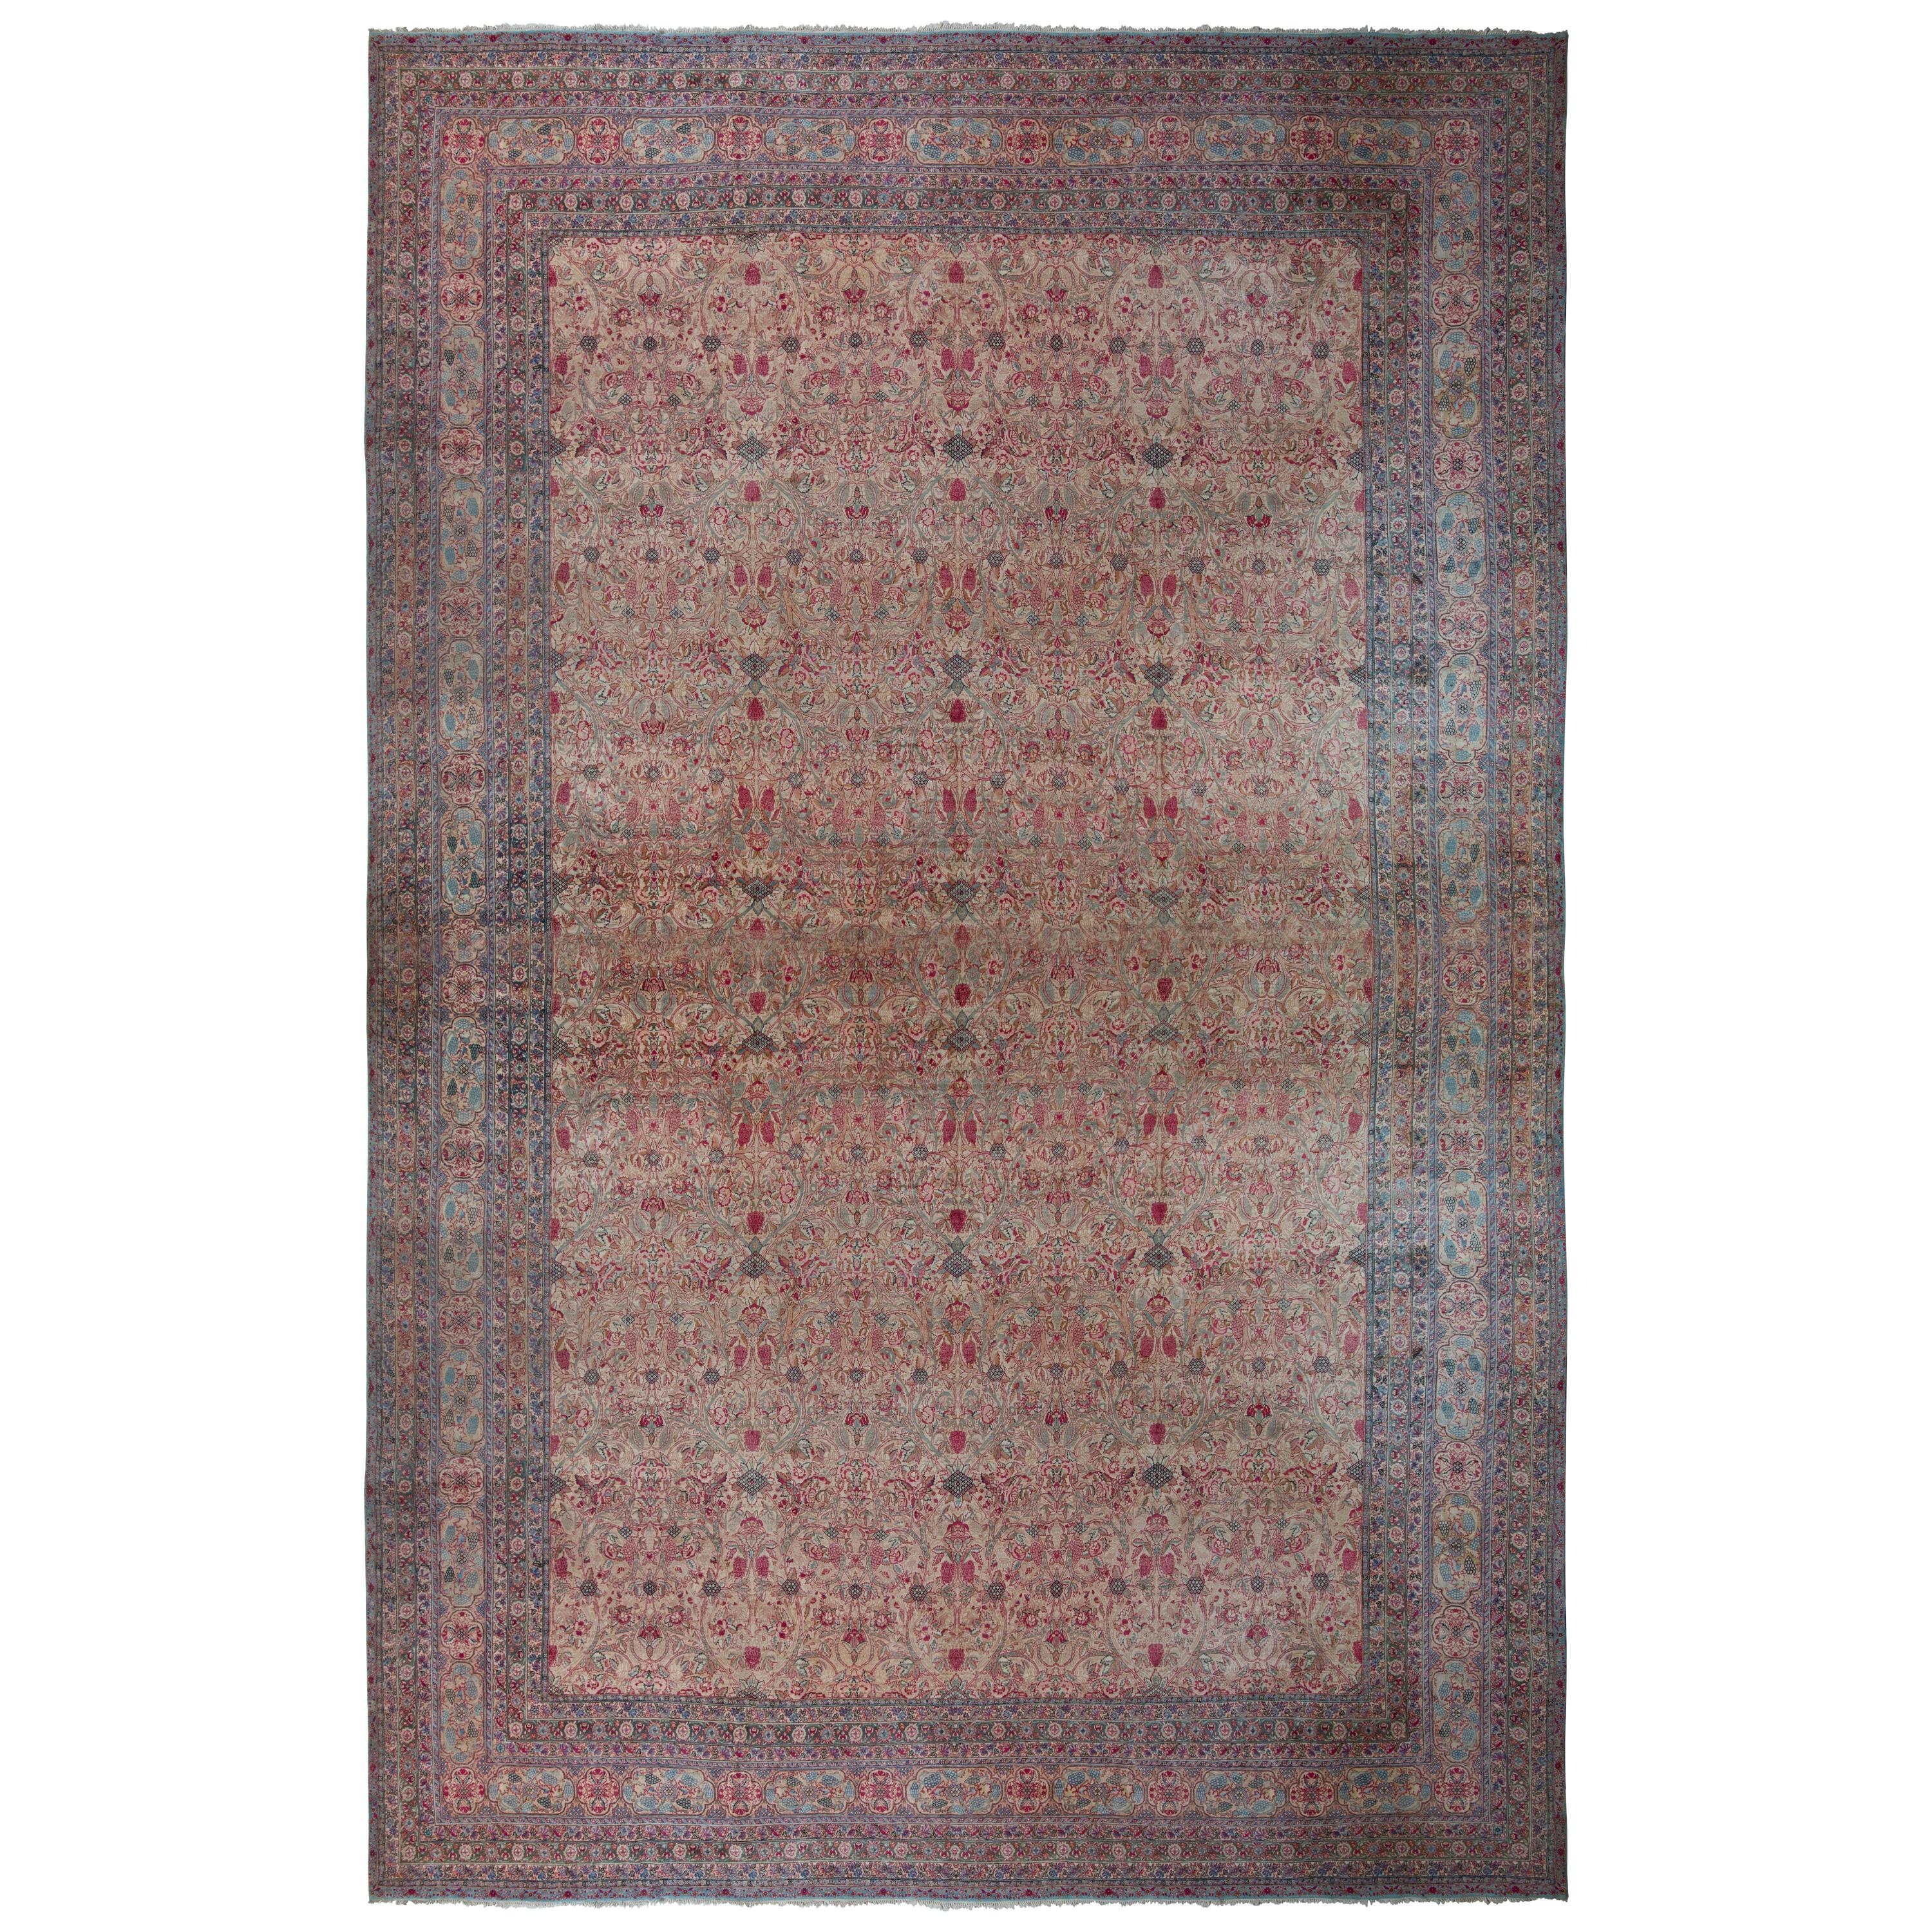 Hand-Knotted Antique Kerman Rug in Beige Persian Floral Pattern